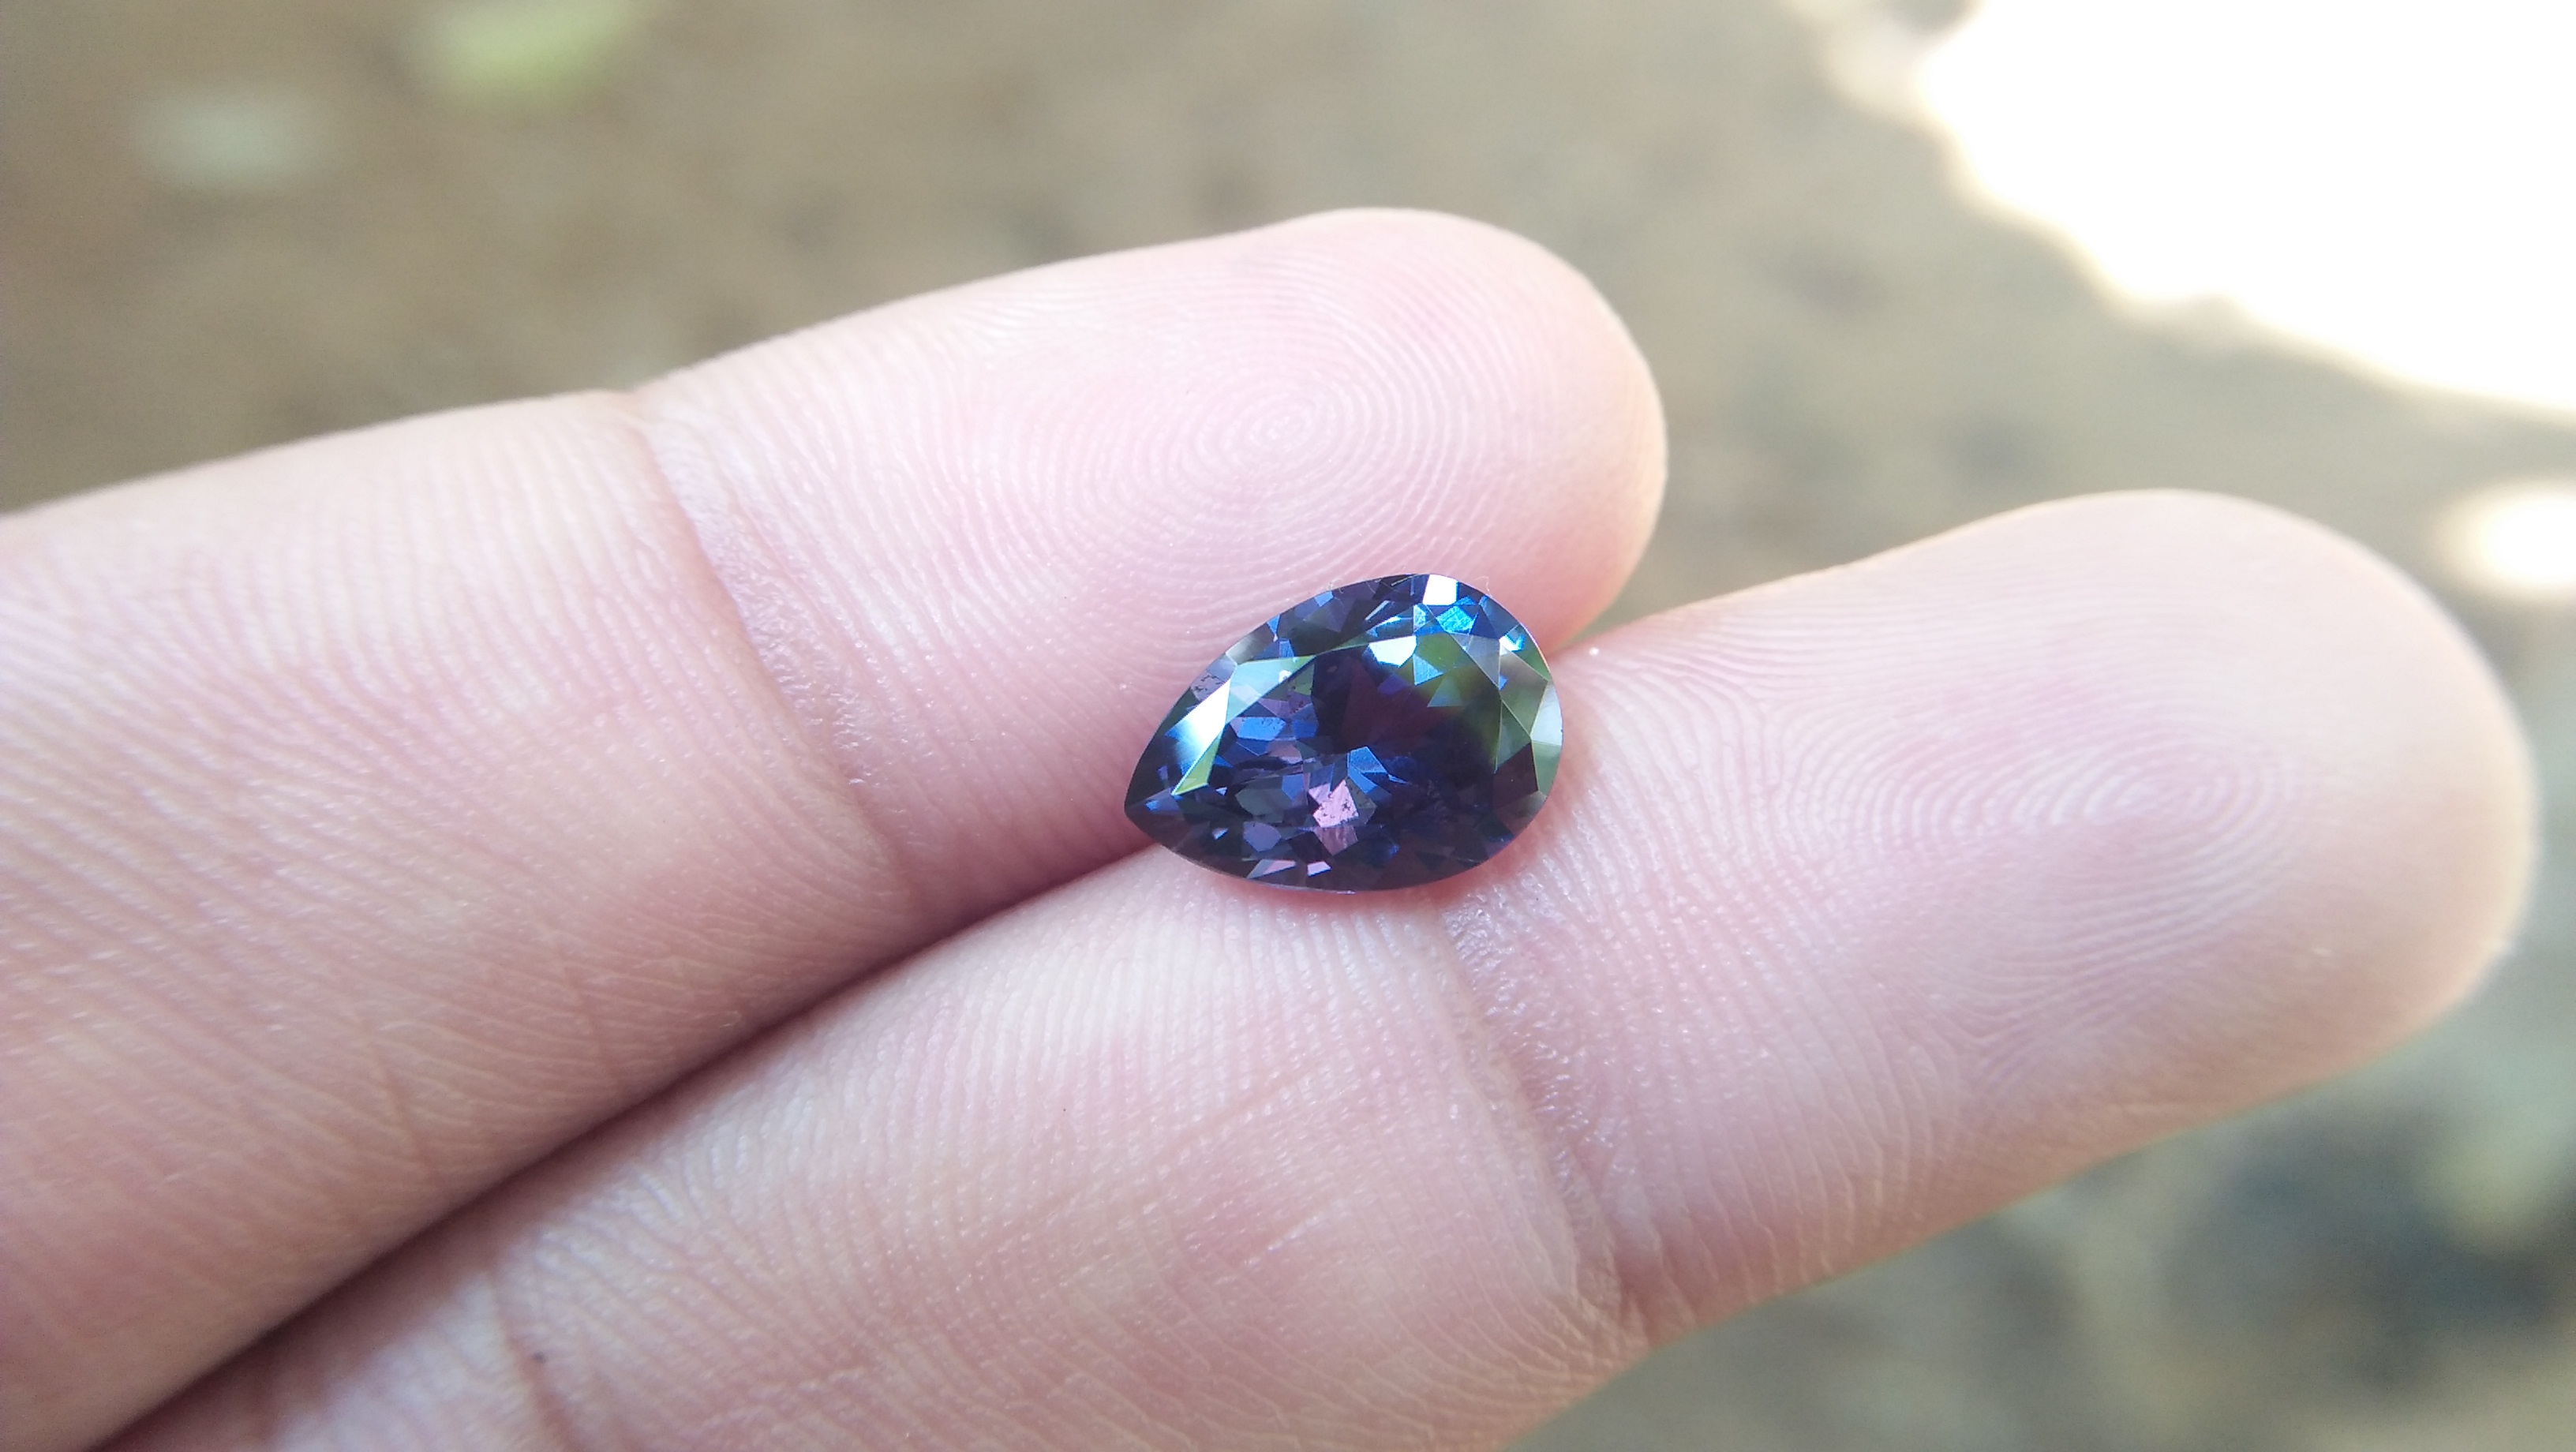 NATURAL BLUE SPINEL Shape : Pear Clarity : Very Clean Treatment : Natural/Unheated Dimension : 10.8mm x 7.5mm x 4.9mm Weight : 2.50 Cts Location : City of Gem Ratnapura Sri Lanka